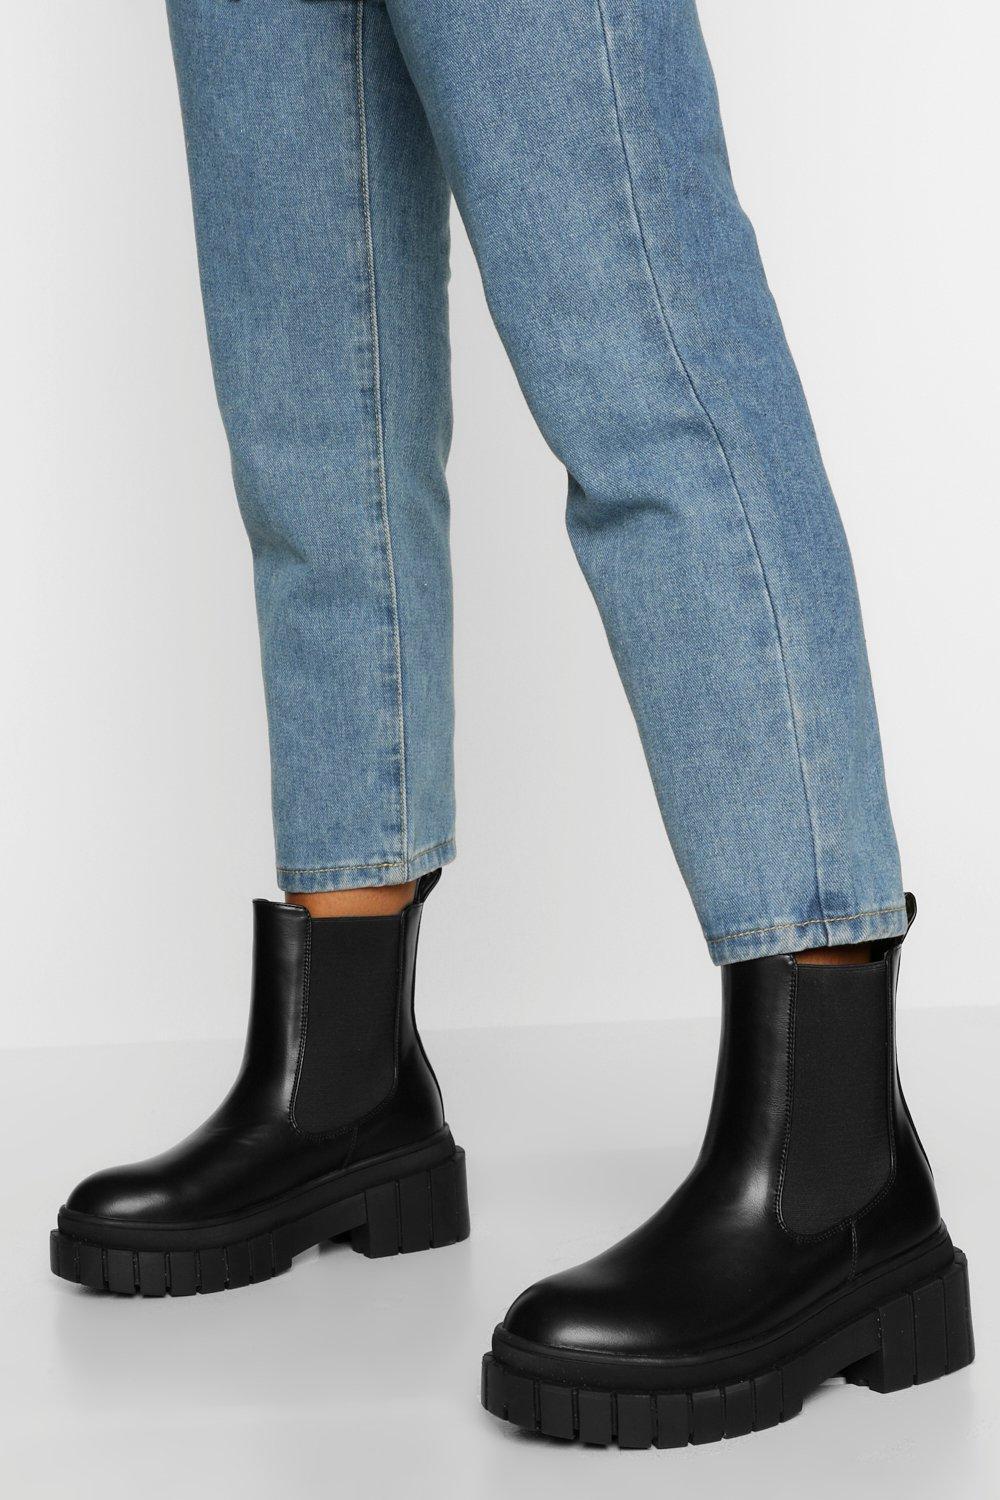 Boohoo Chunky Sole Chelsea Boot in Black - Lyst